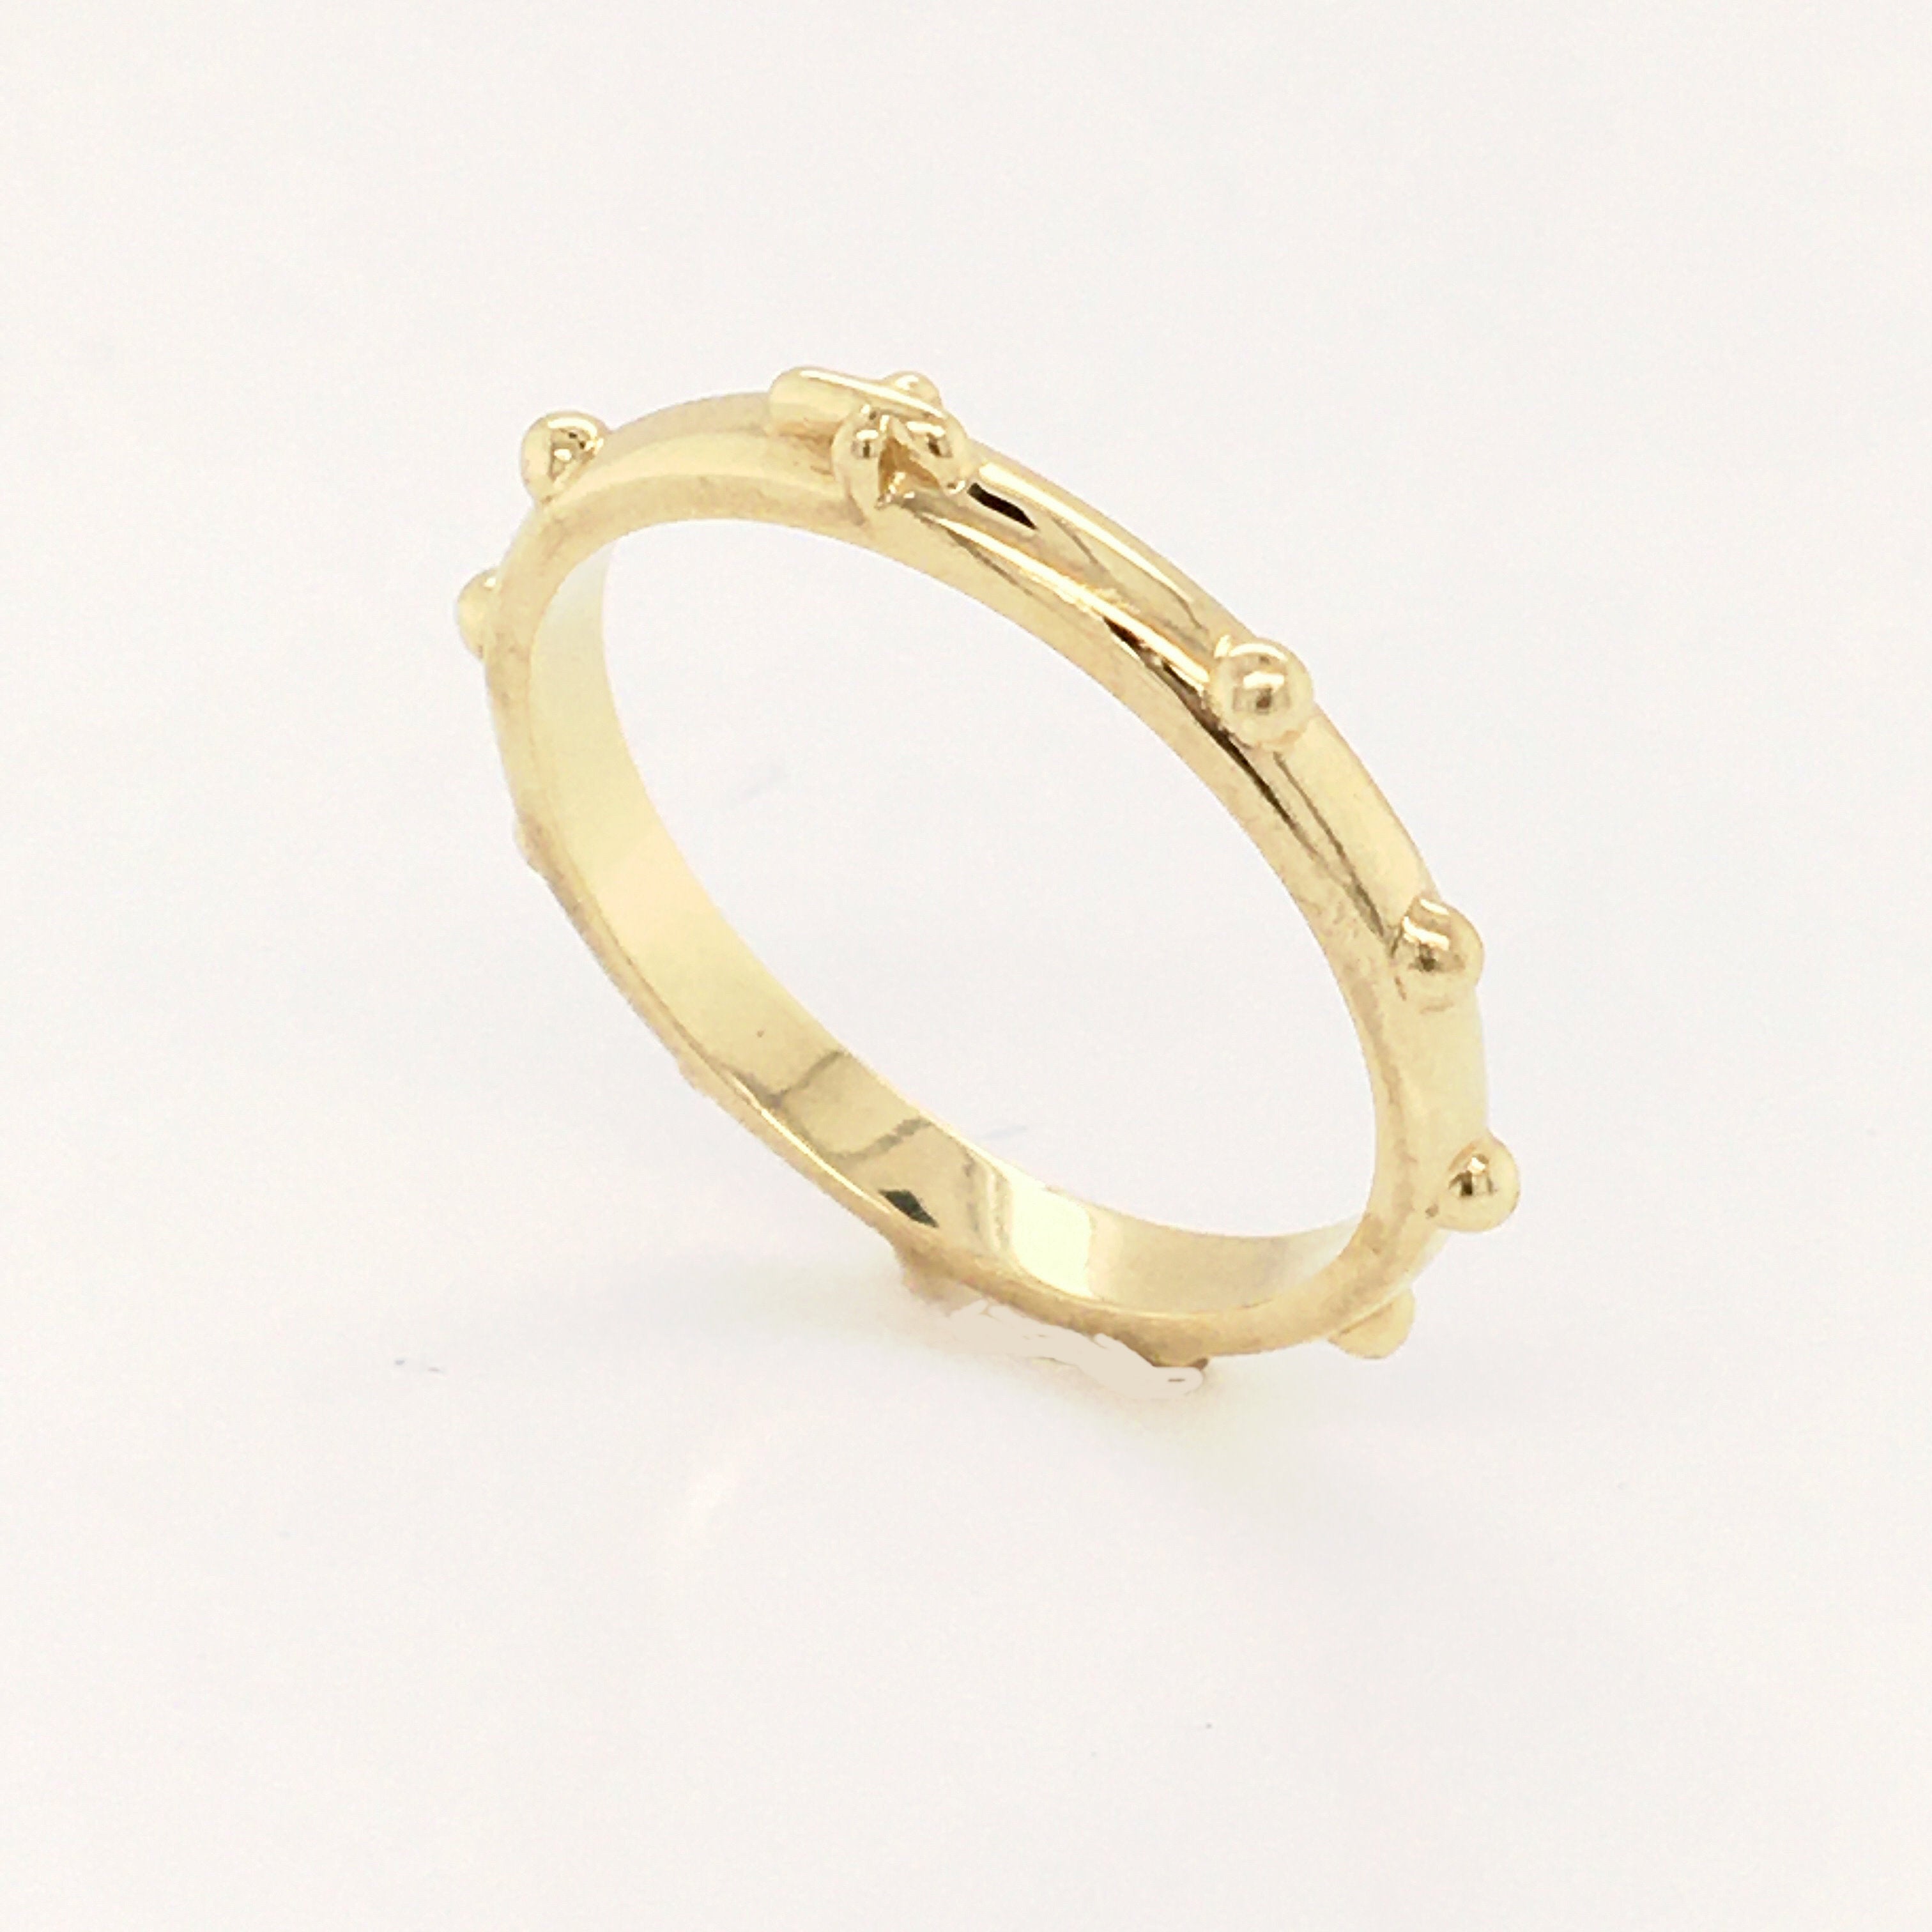 Rosary Ring Woman Yellow Gold 803321713369 - GioielleriaLucchese.it